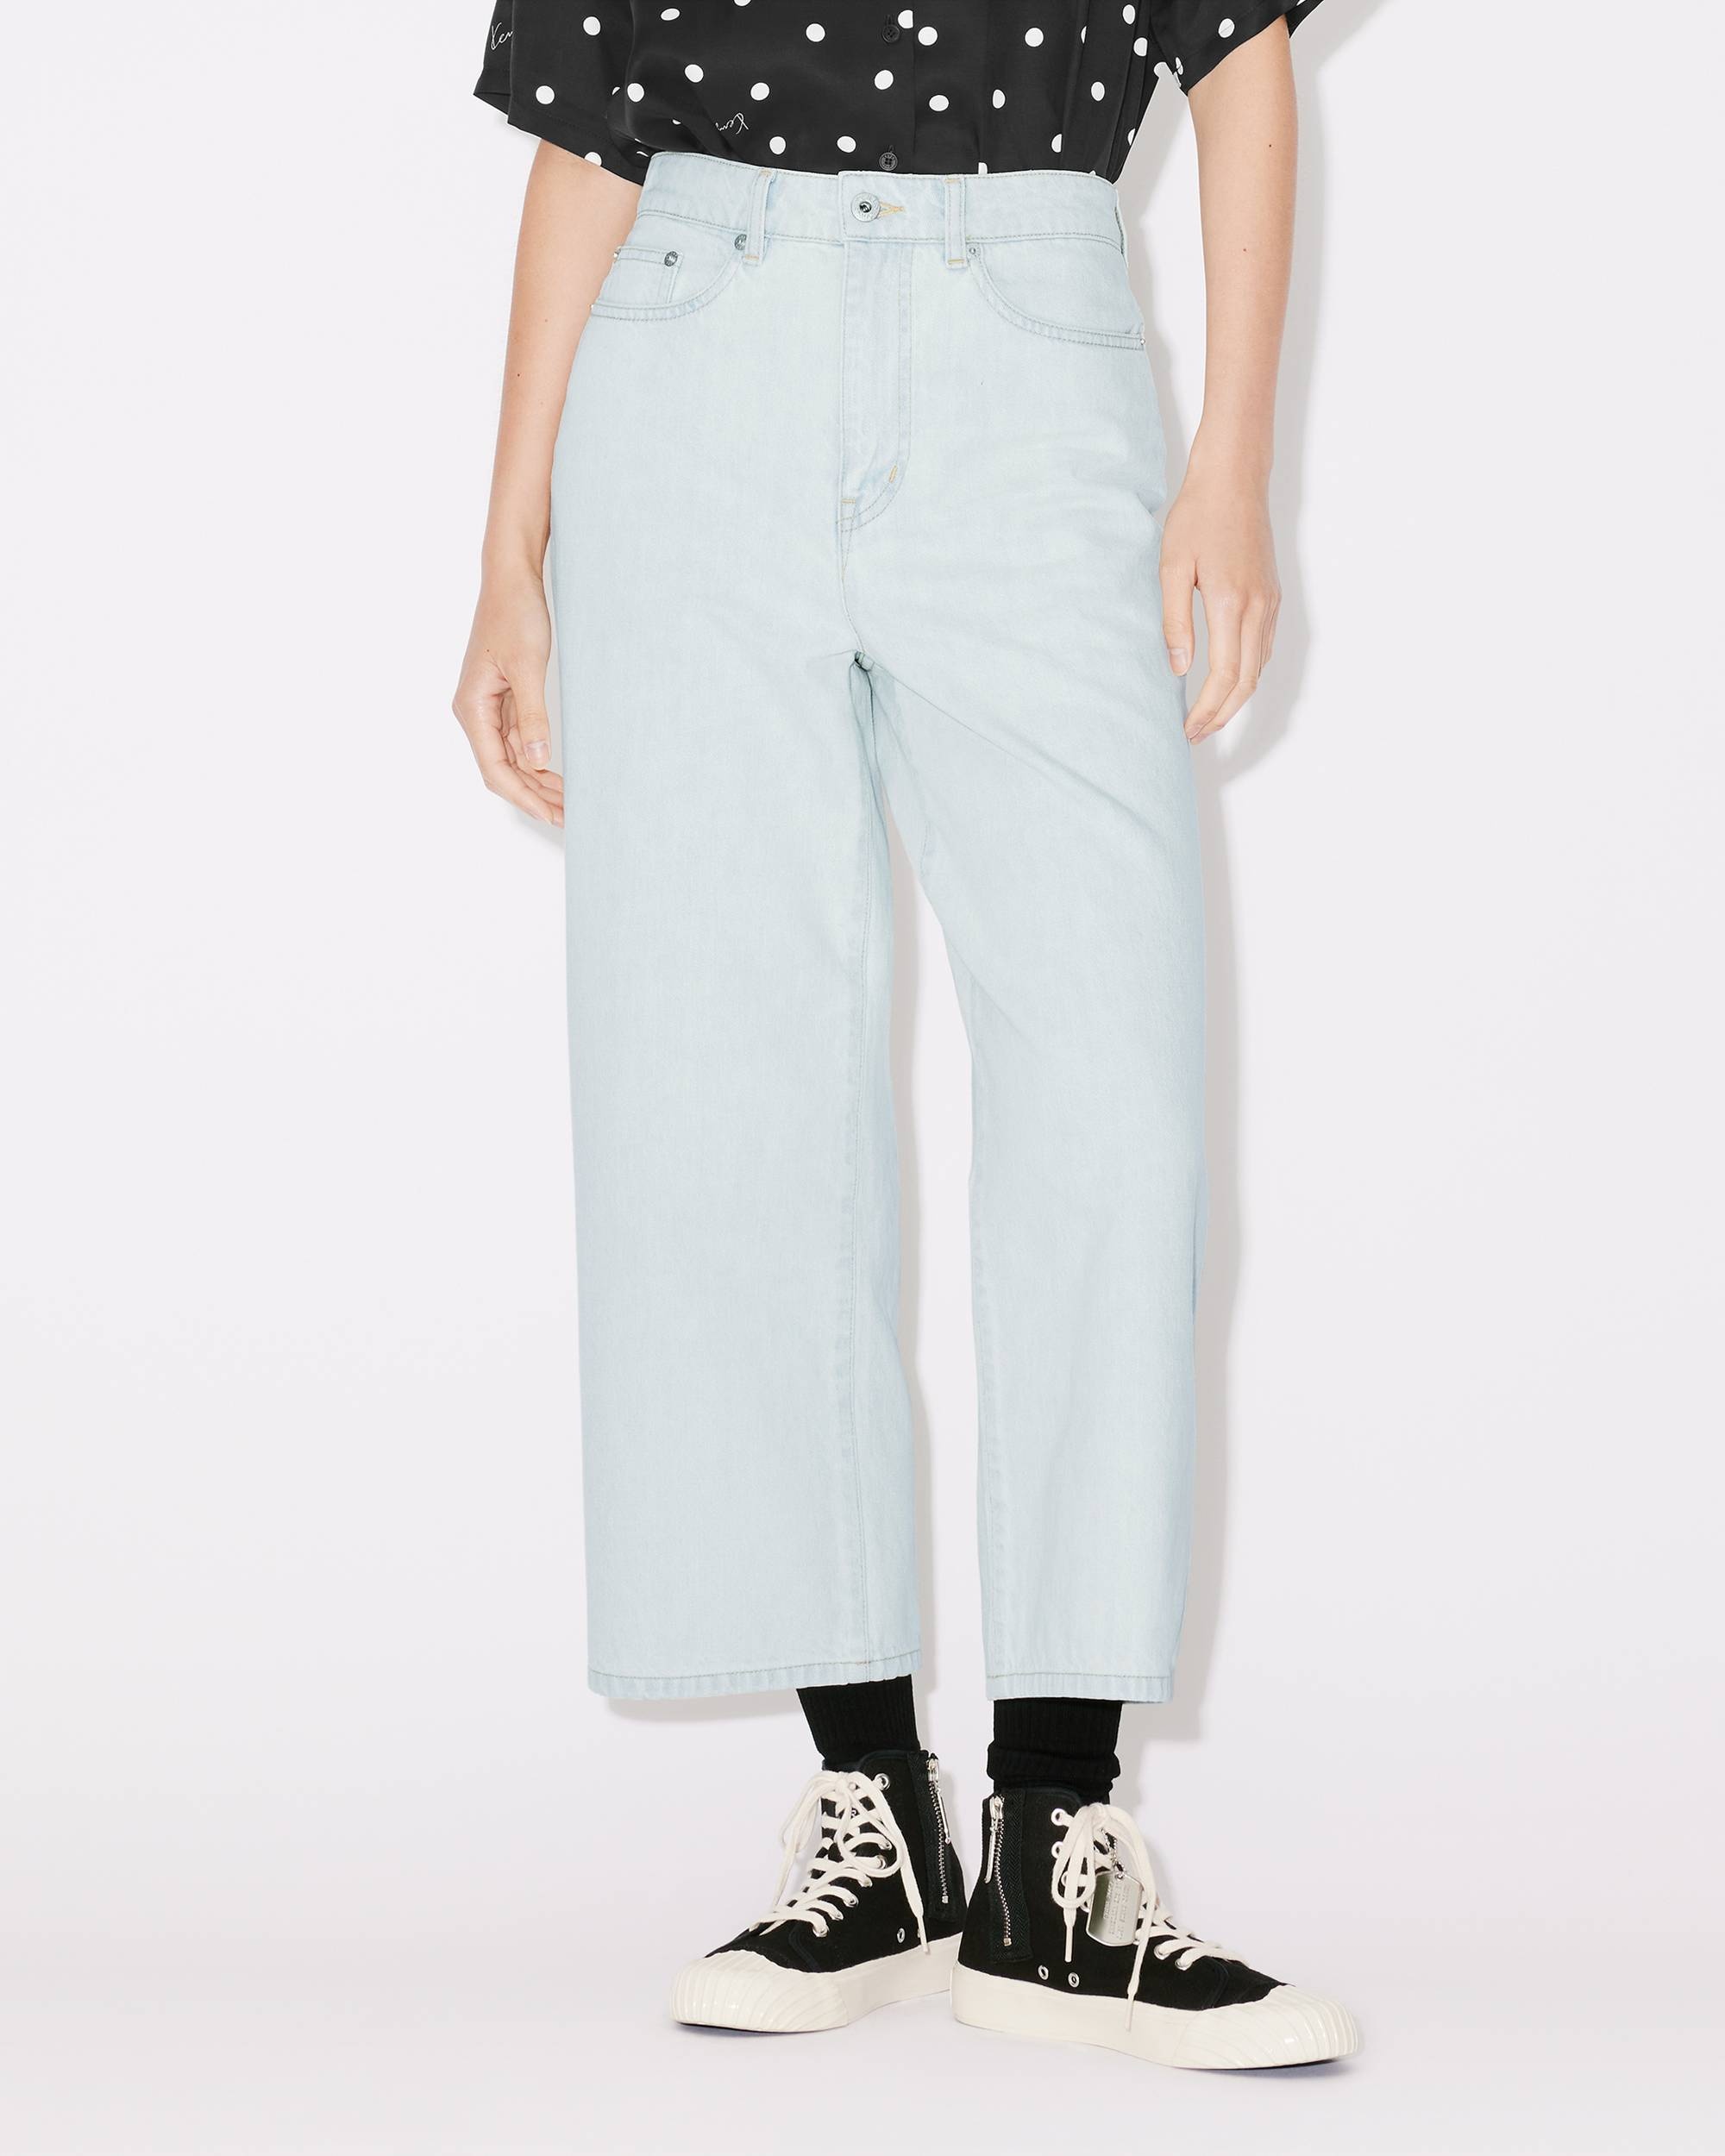 SUMIRE cropped jeans - 4